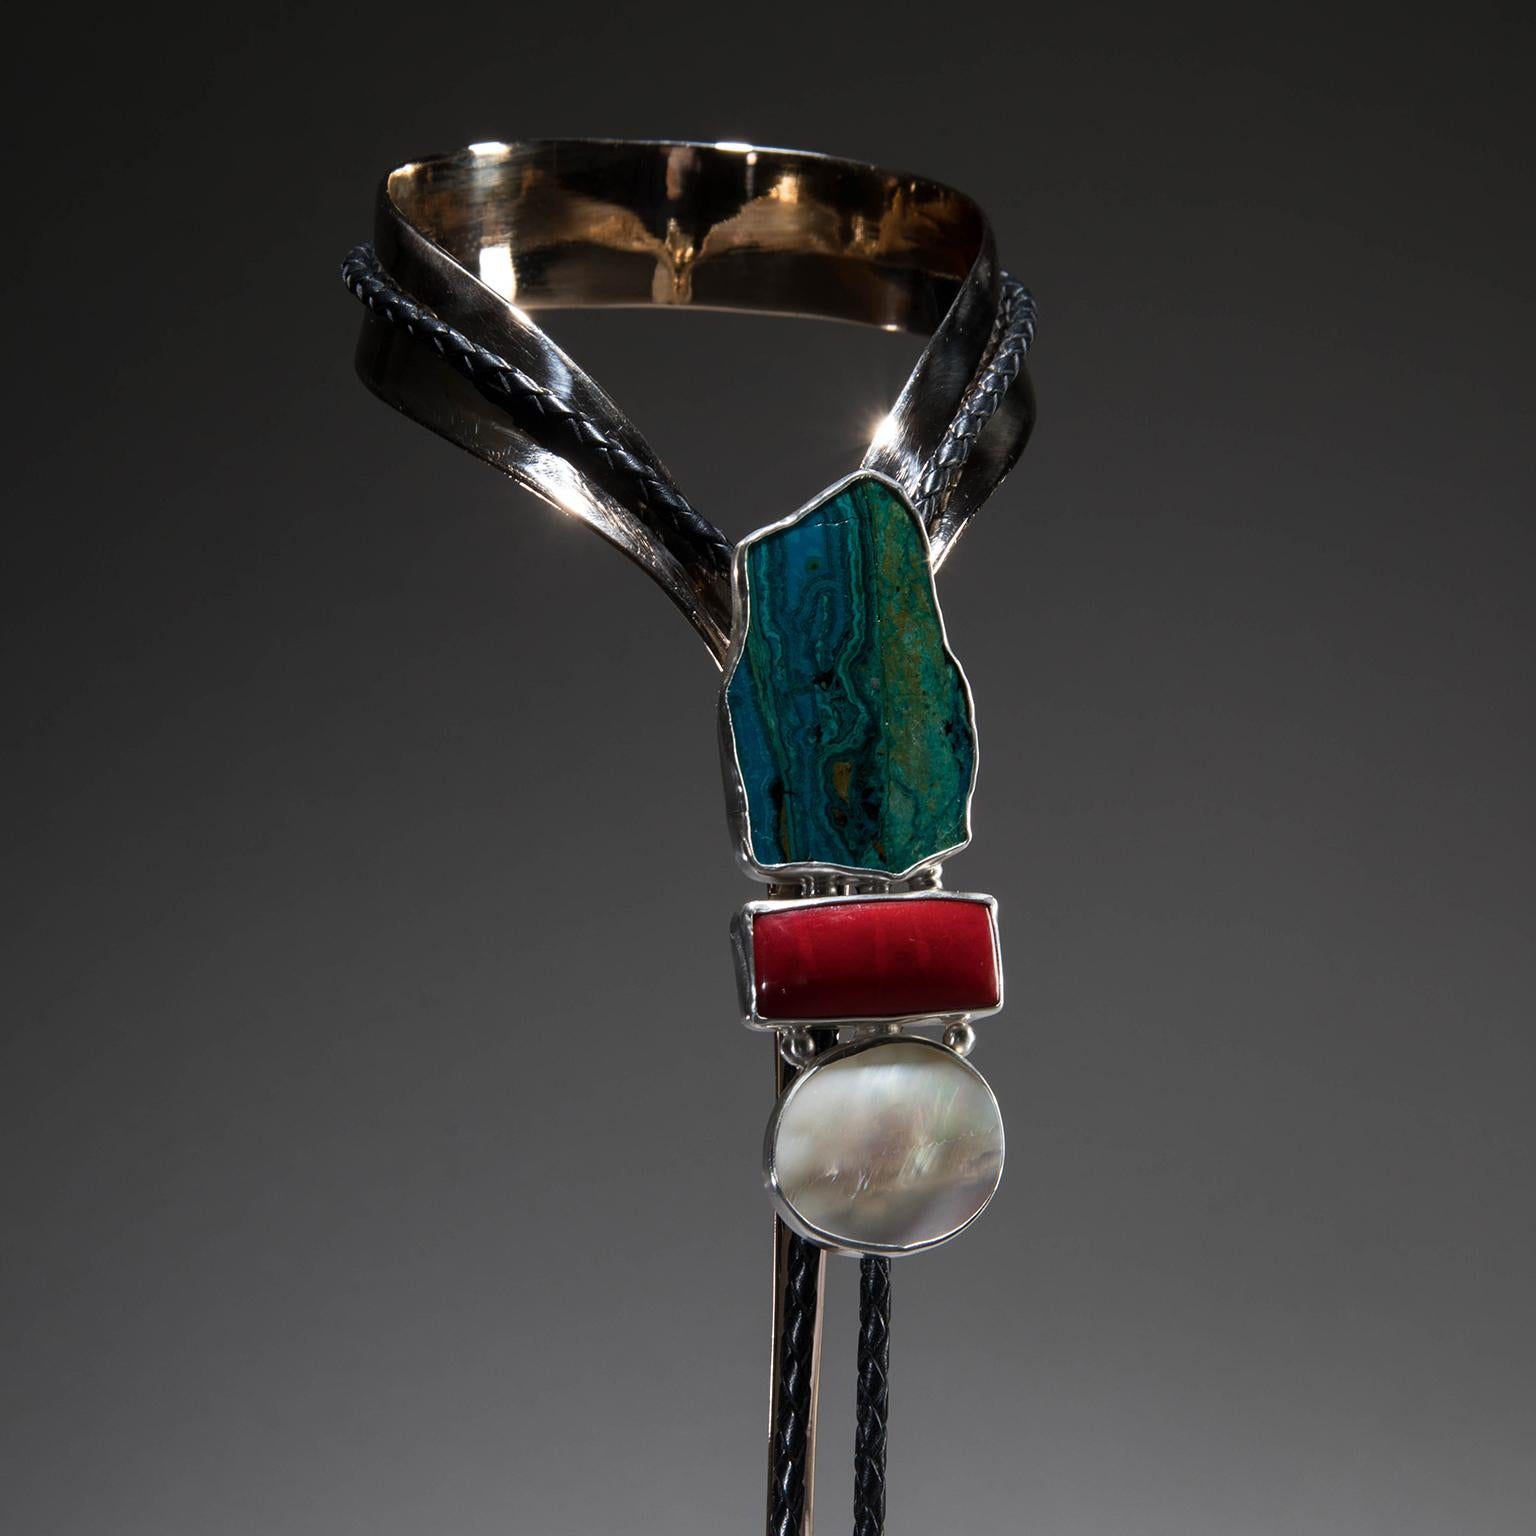 Chrysocolla Bolo Tie on Selenite.

The infinite rhythms of the ocean whisper from studio Greytak’s Chrysocolla Bolo Tie on Selenite. This lariat necklace features tropical waves of teal, aqua, and sea blue flow toward a sandy beach in a stunning